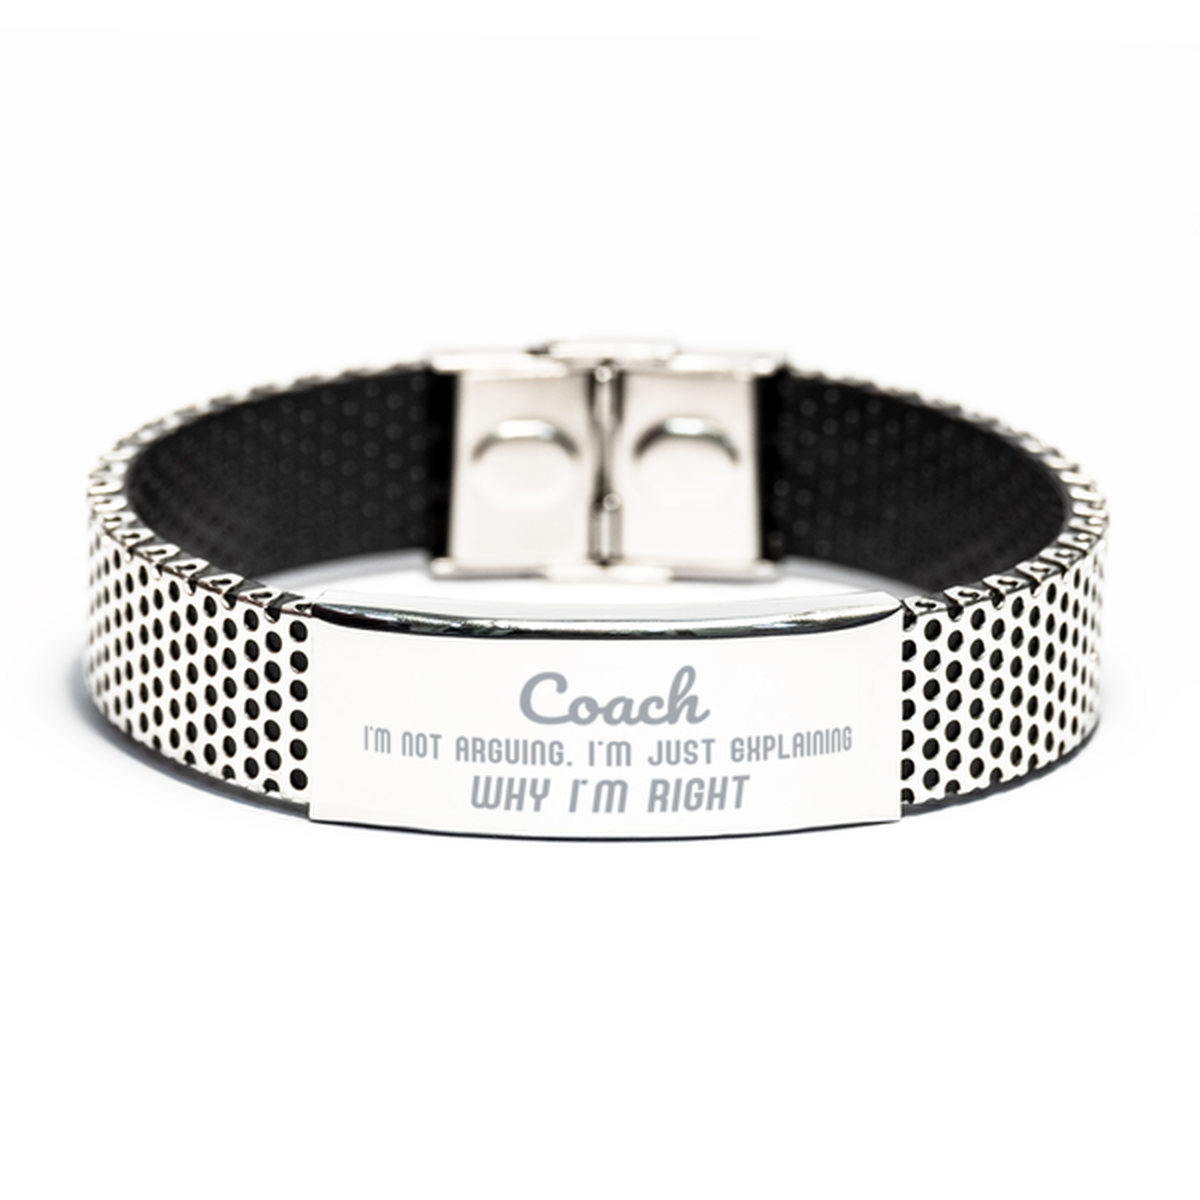 Coach I'm not Arguing. I'm Just Explaining Why I'm RIGHT Stainless Steel Bracelet, Funny Saying Quote Coach Gifts For Coach Graduation Birthday Christmas Gifts for Men Women Coworker